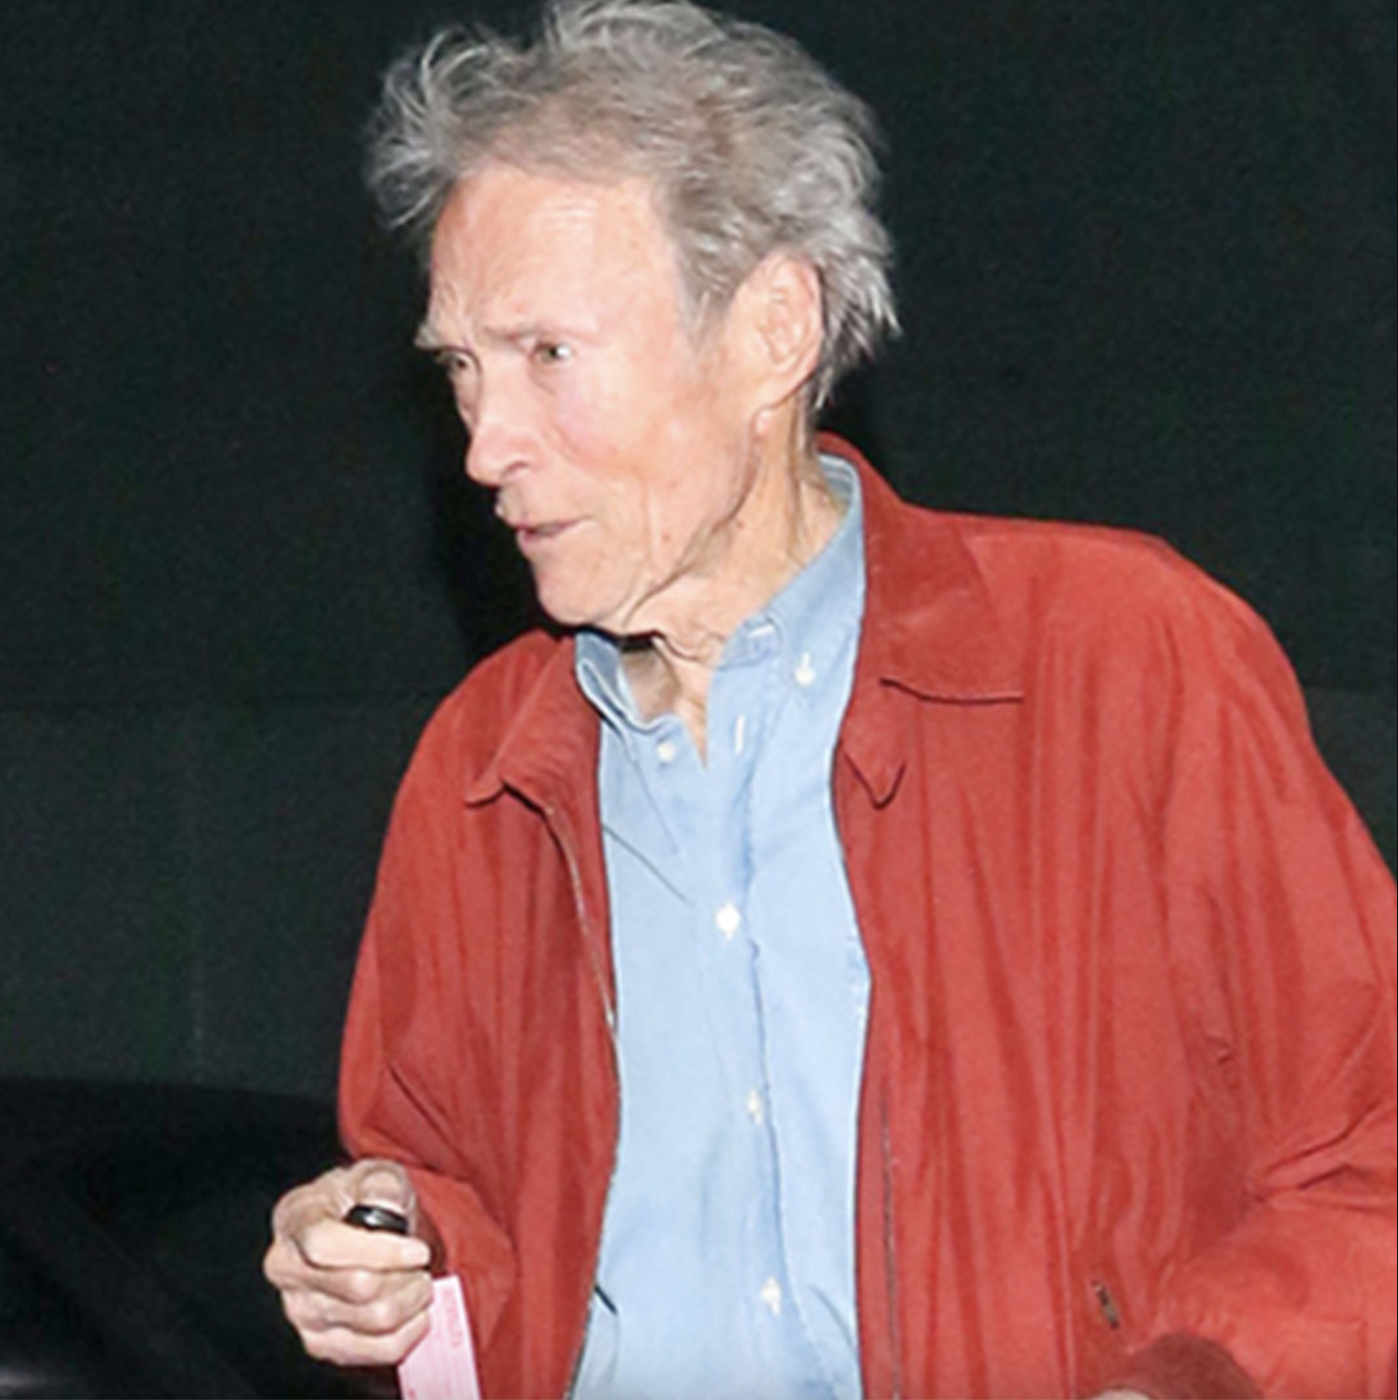 After spending his whole life in the spotlight, Clint Eastwood was finally given news that had been kept a secret from him for 30 years